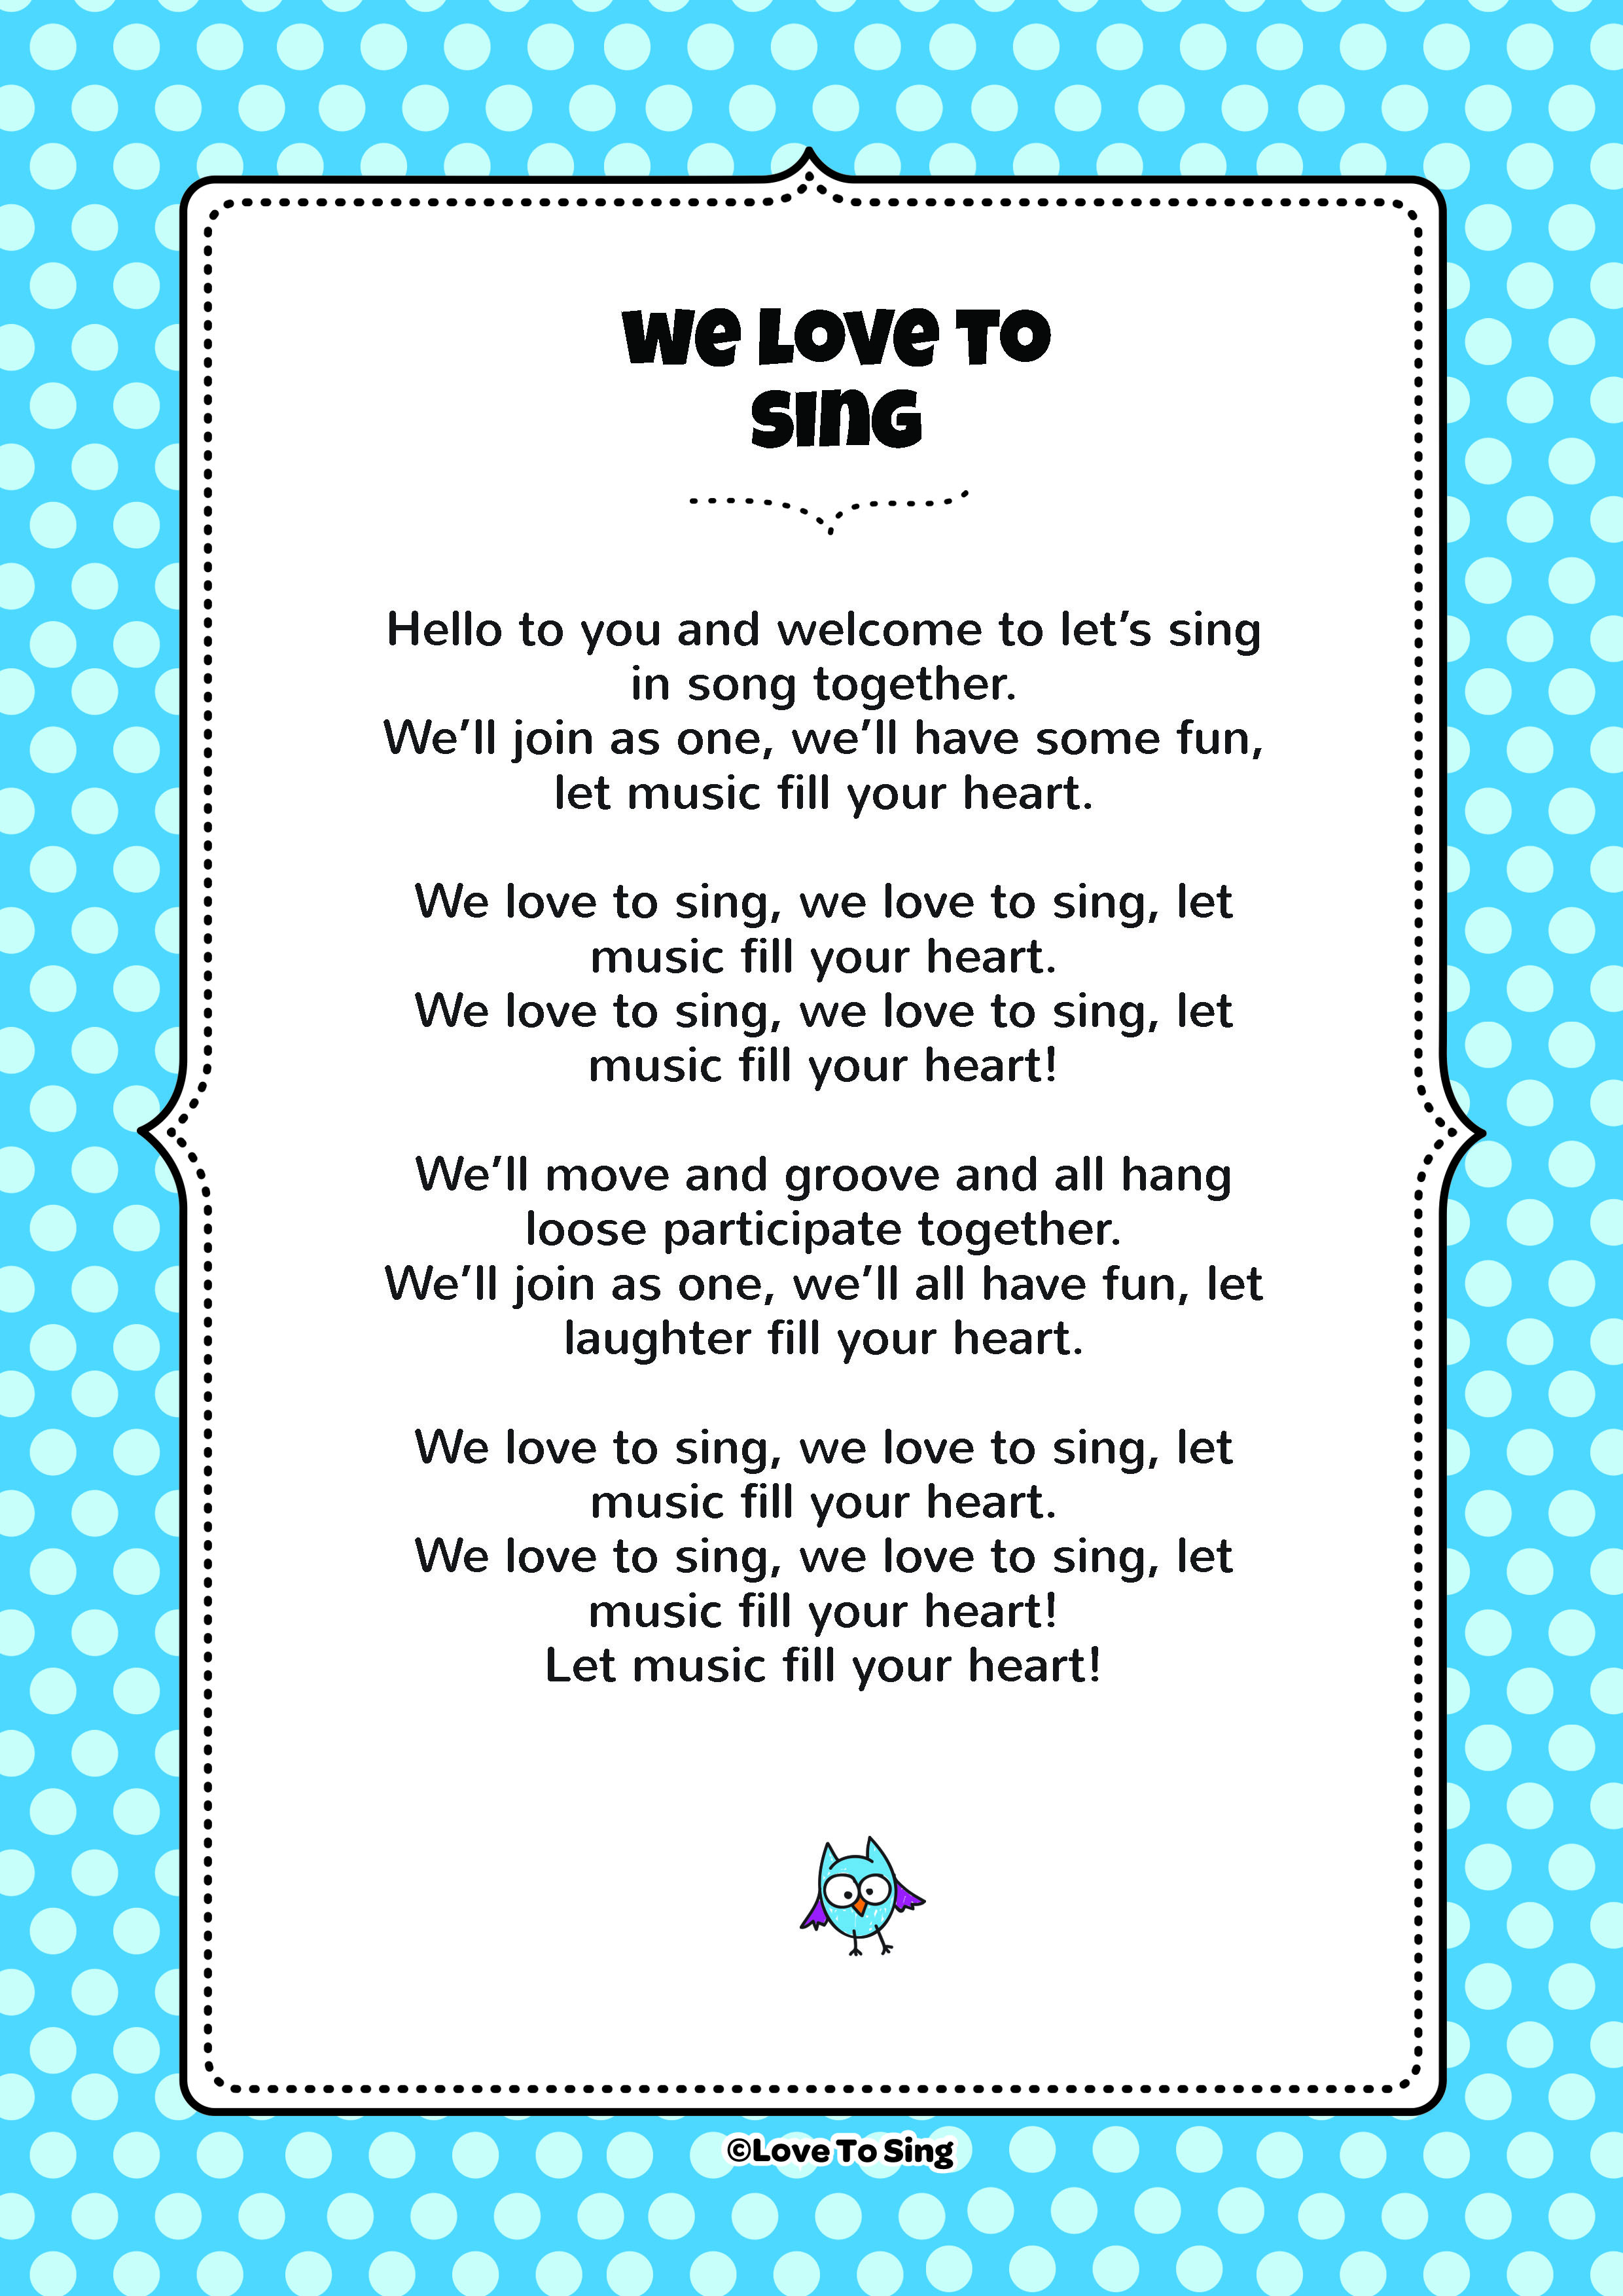 Singing songs перевод на русский. Sing Sing текст. Sing Songs перевод. Sing a Song. Hello Song singing Walrus.